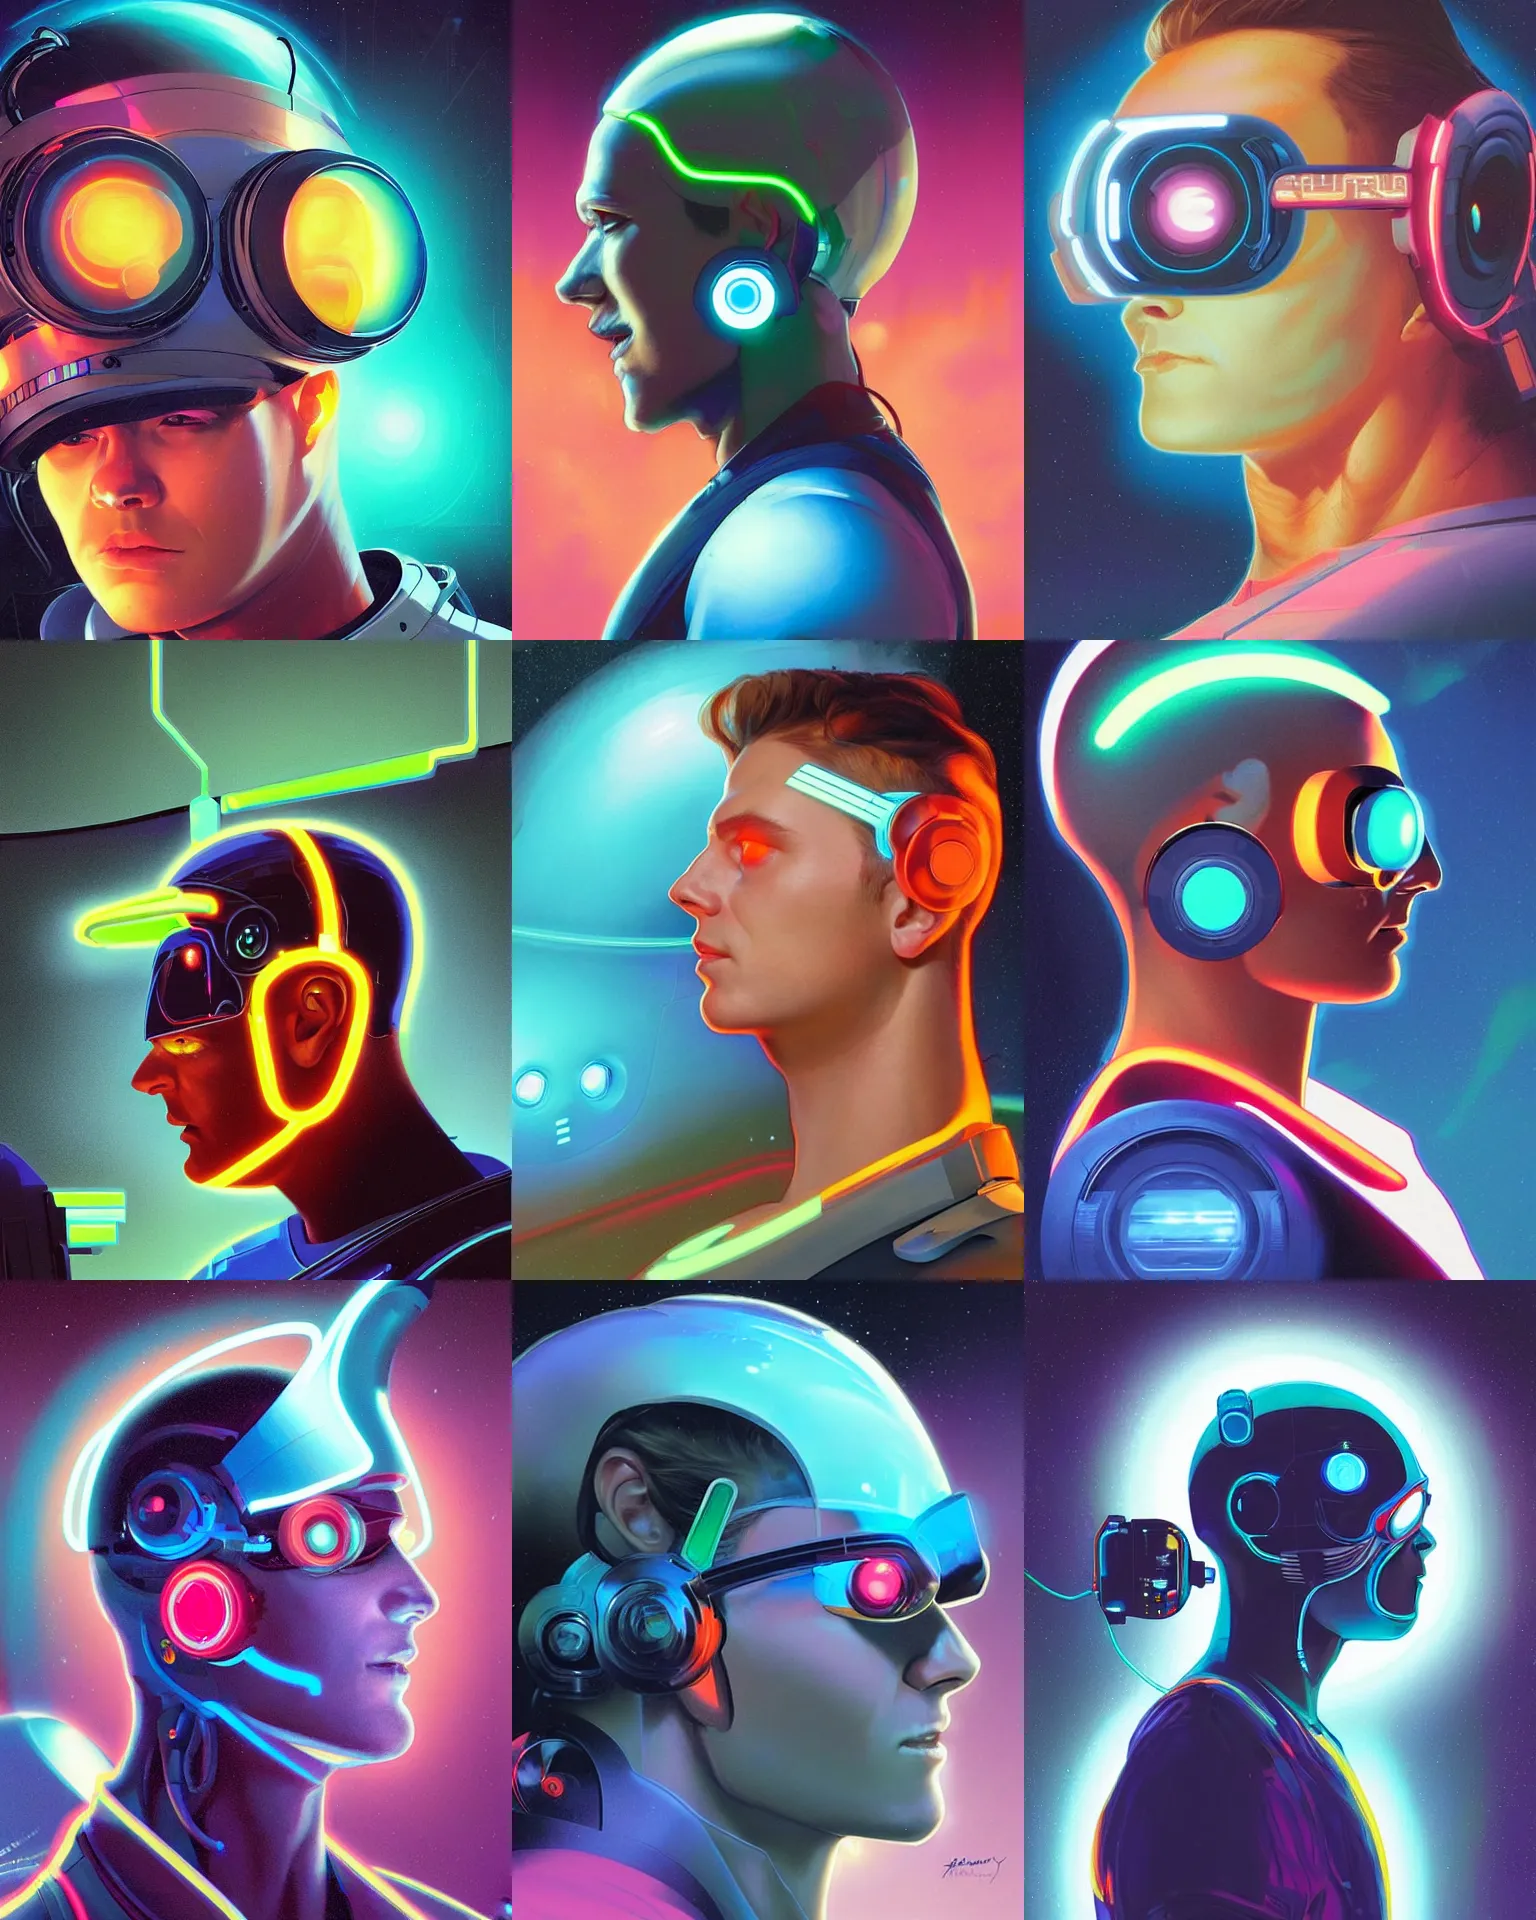 Prompt: side view future coder man, sleek cyclops display over eyes and glowing headset, neon accents, holographic colors, desaturated headshot portrait digital painting by rhads, john berkey, tom whalen, alex grey, alphonse mucha, donoto giancola, dean cornwall, astronaut cyberpunk electric lights profile